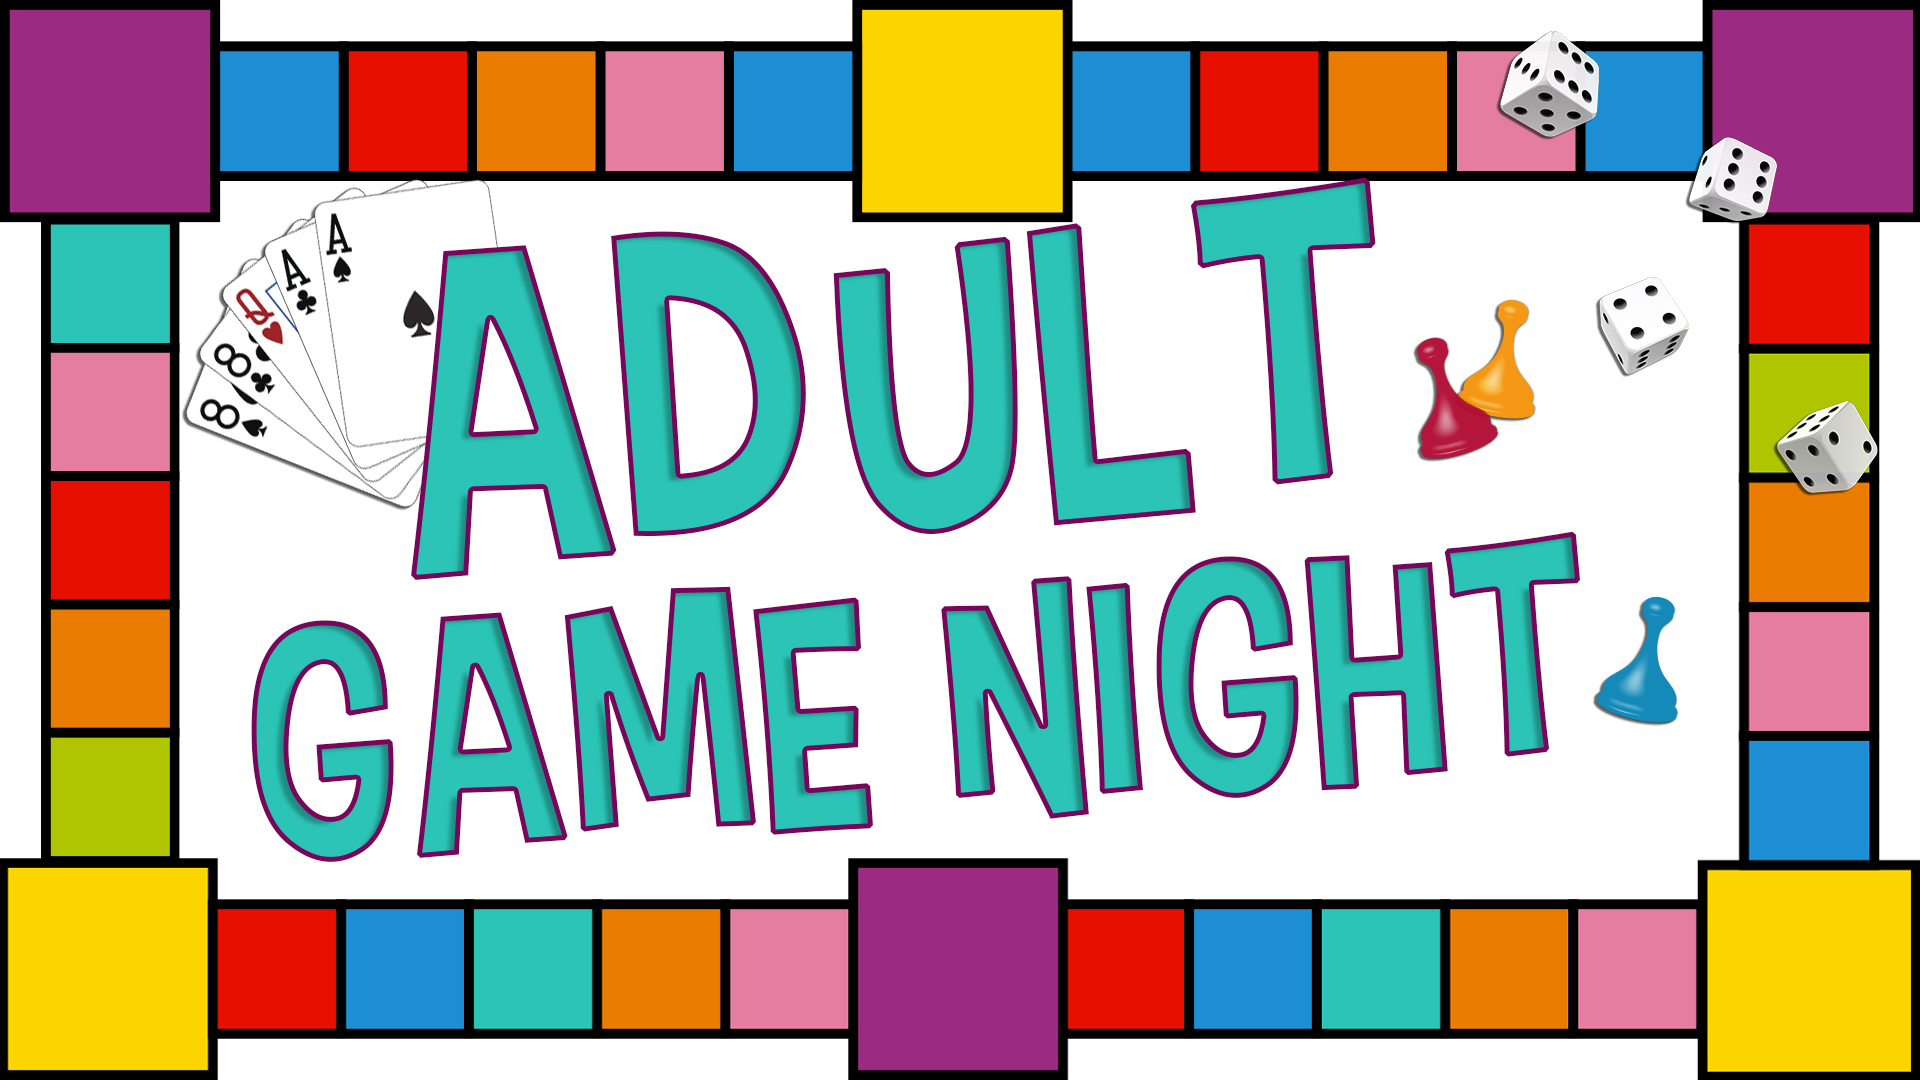 Image reads "Adult Game Night" with a game board as the border. Game pieces, cards, and dice are scattered around the words.